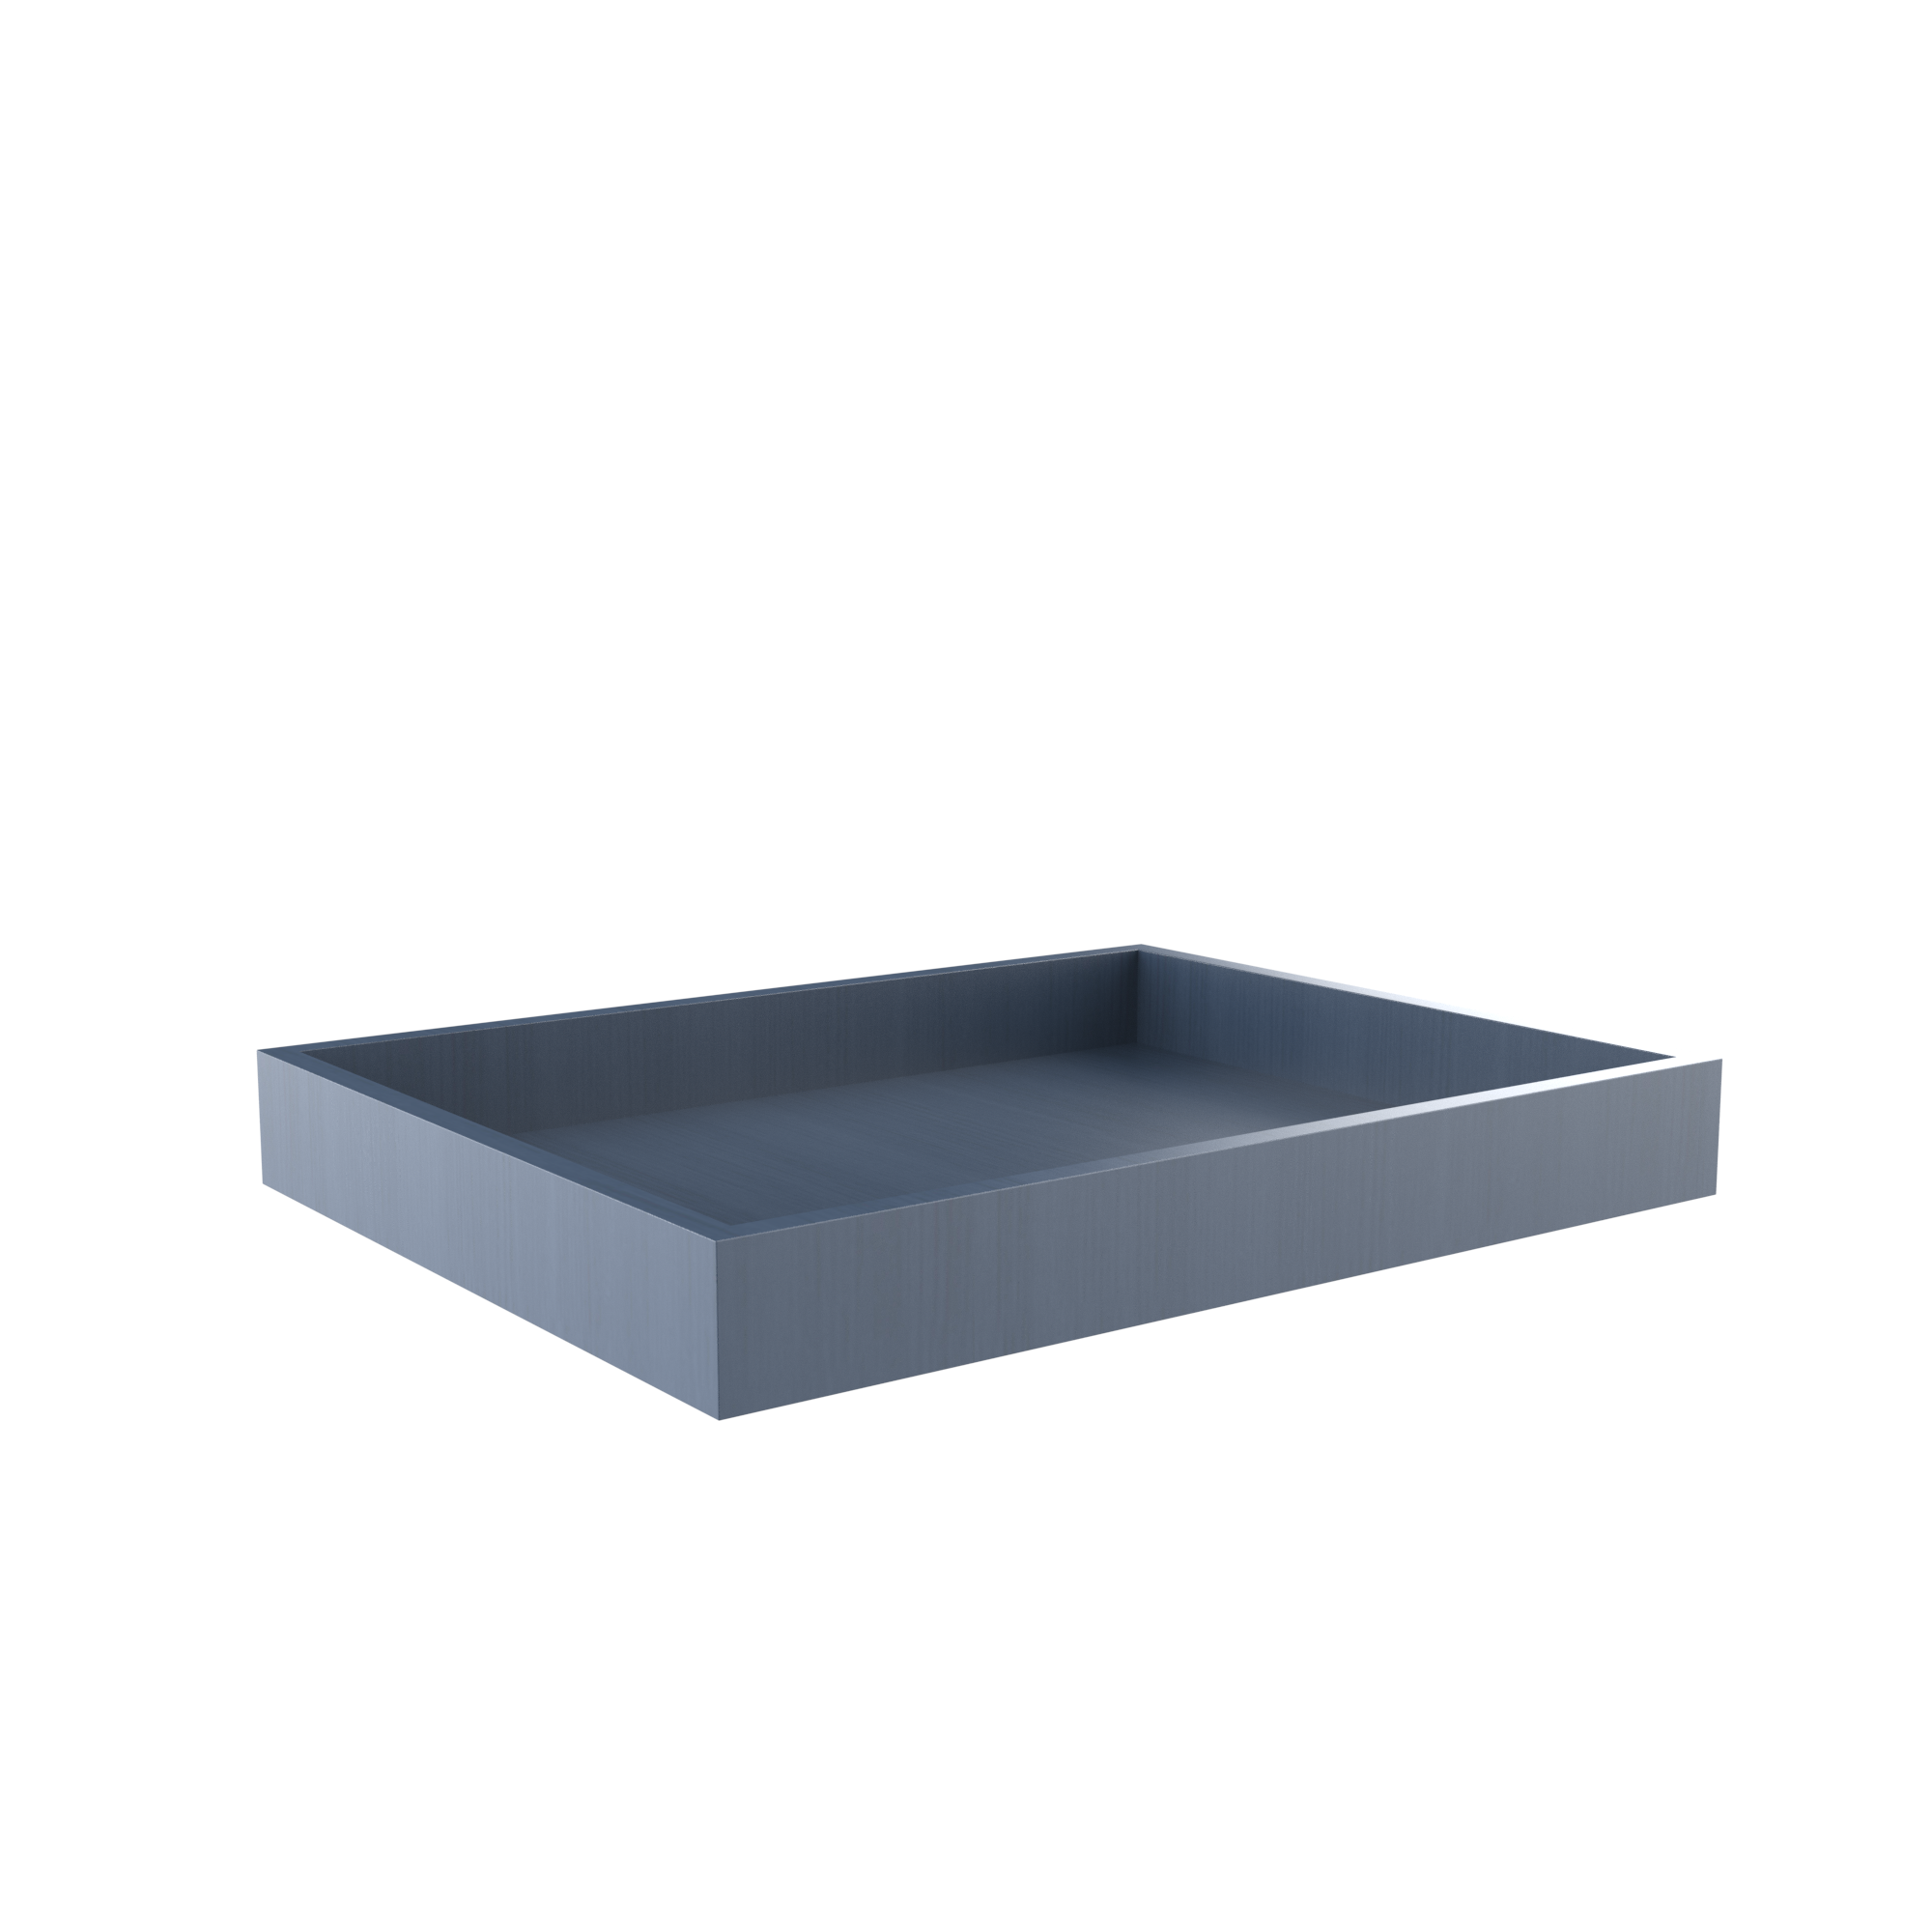 Roll Out Tray for Cabinets - Fits B27 - Blue Shaker Cabinet Cabinet